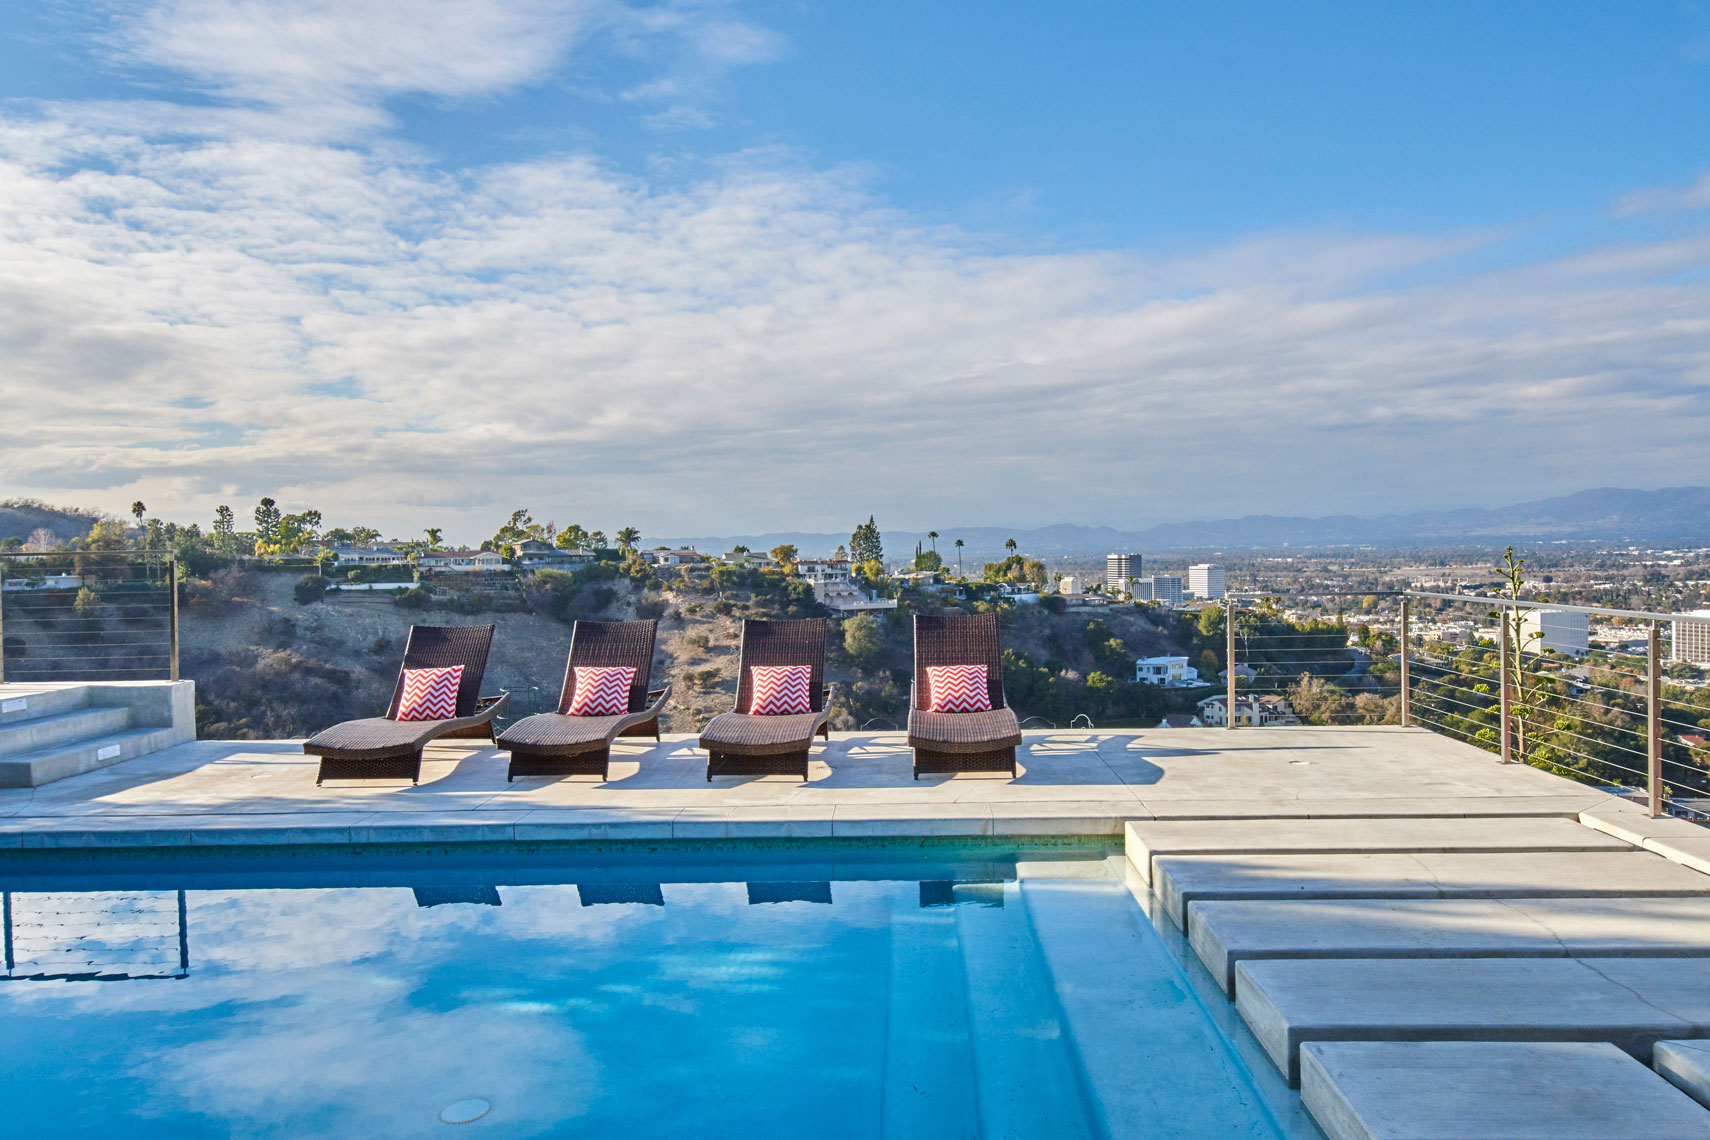 Los-Angeles-California-pool-with-lounge-chairs-and-hillside-views-by-Los-Angeles-architecture photographer